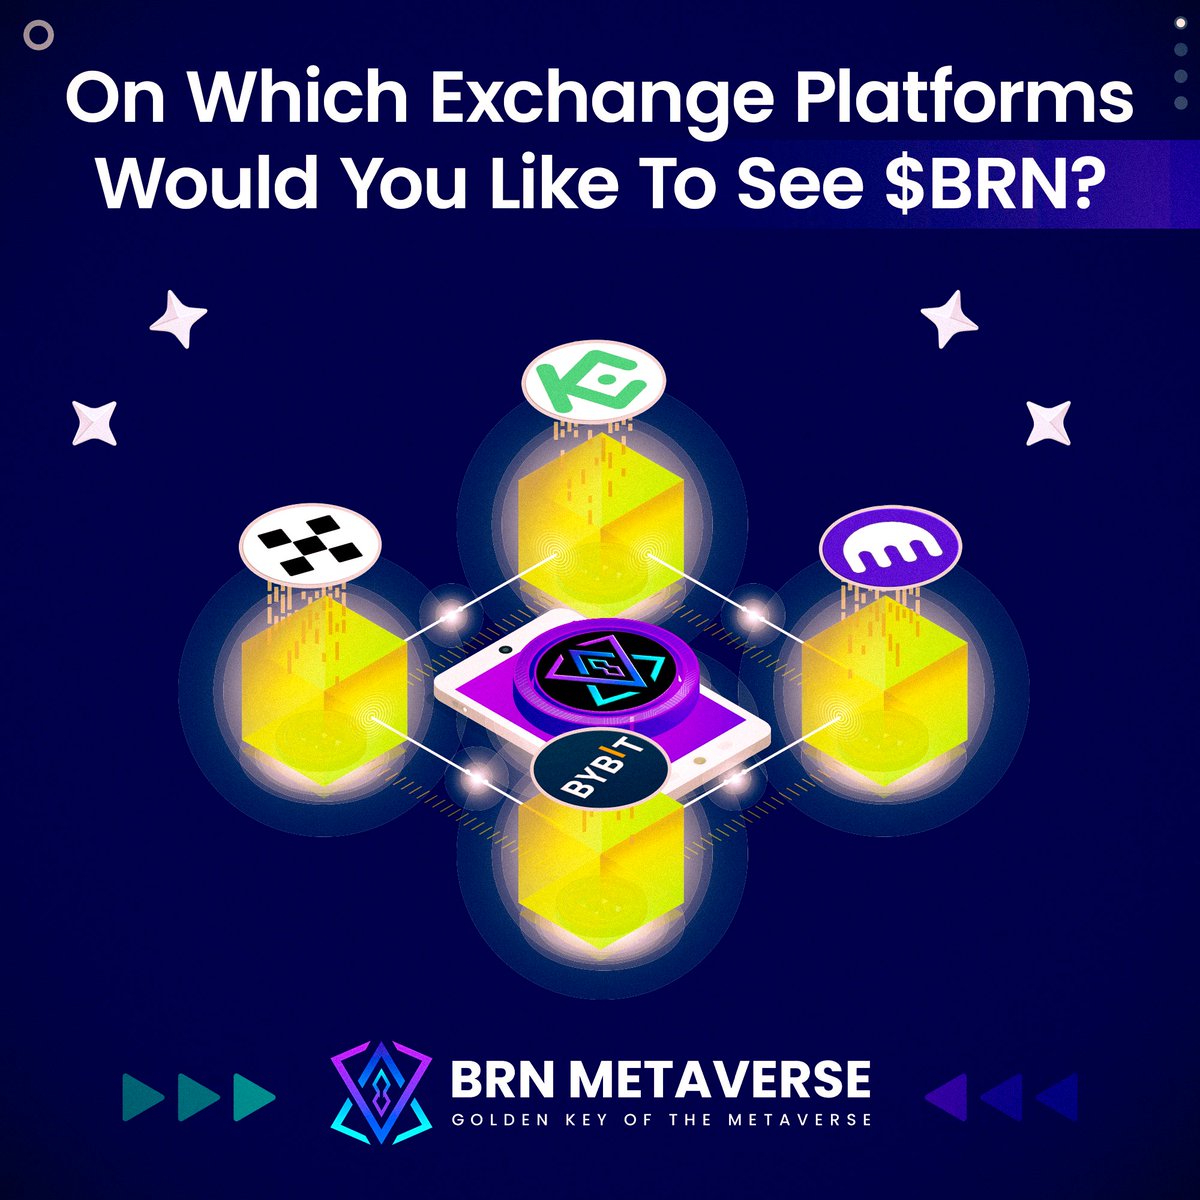 Write in the comments on which exchanges you want to see $BRN! The team will consider this.